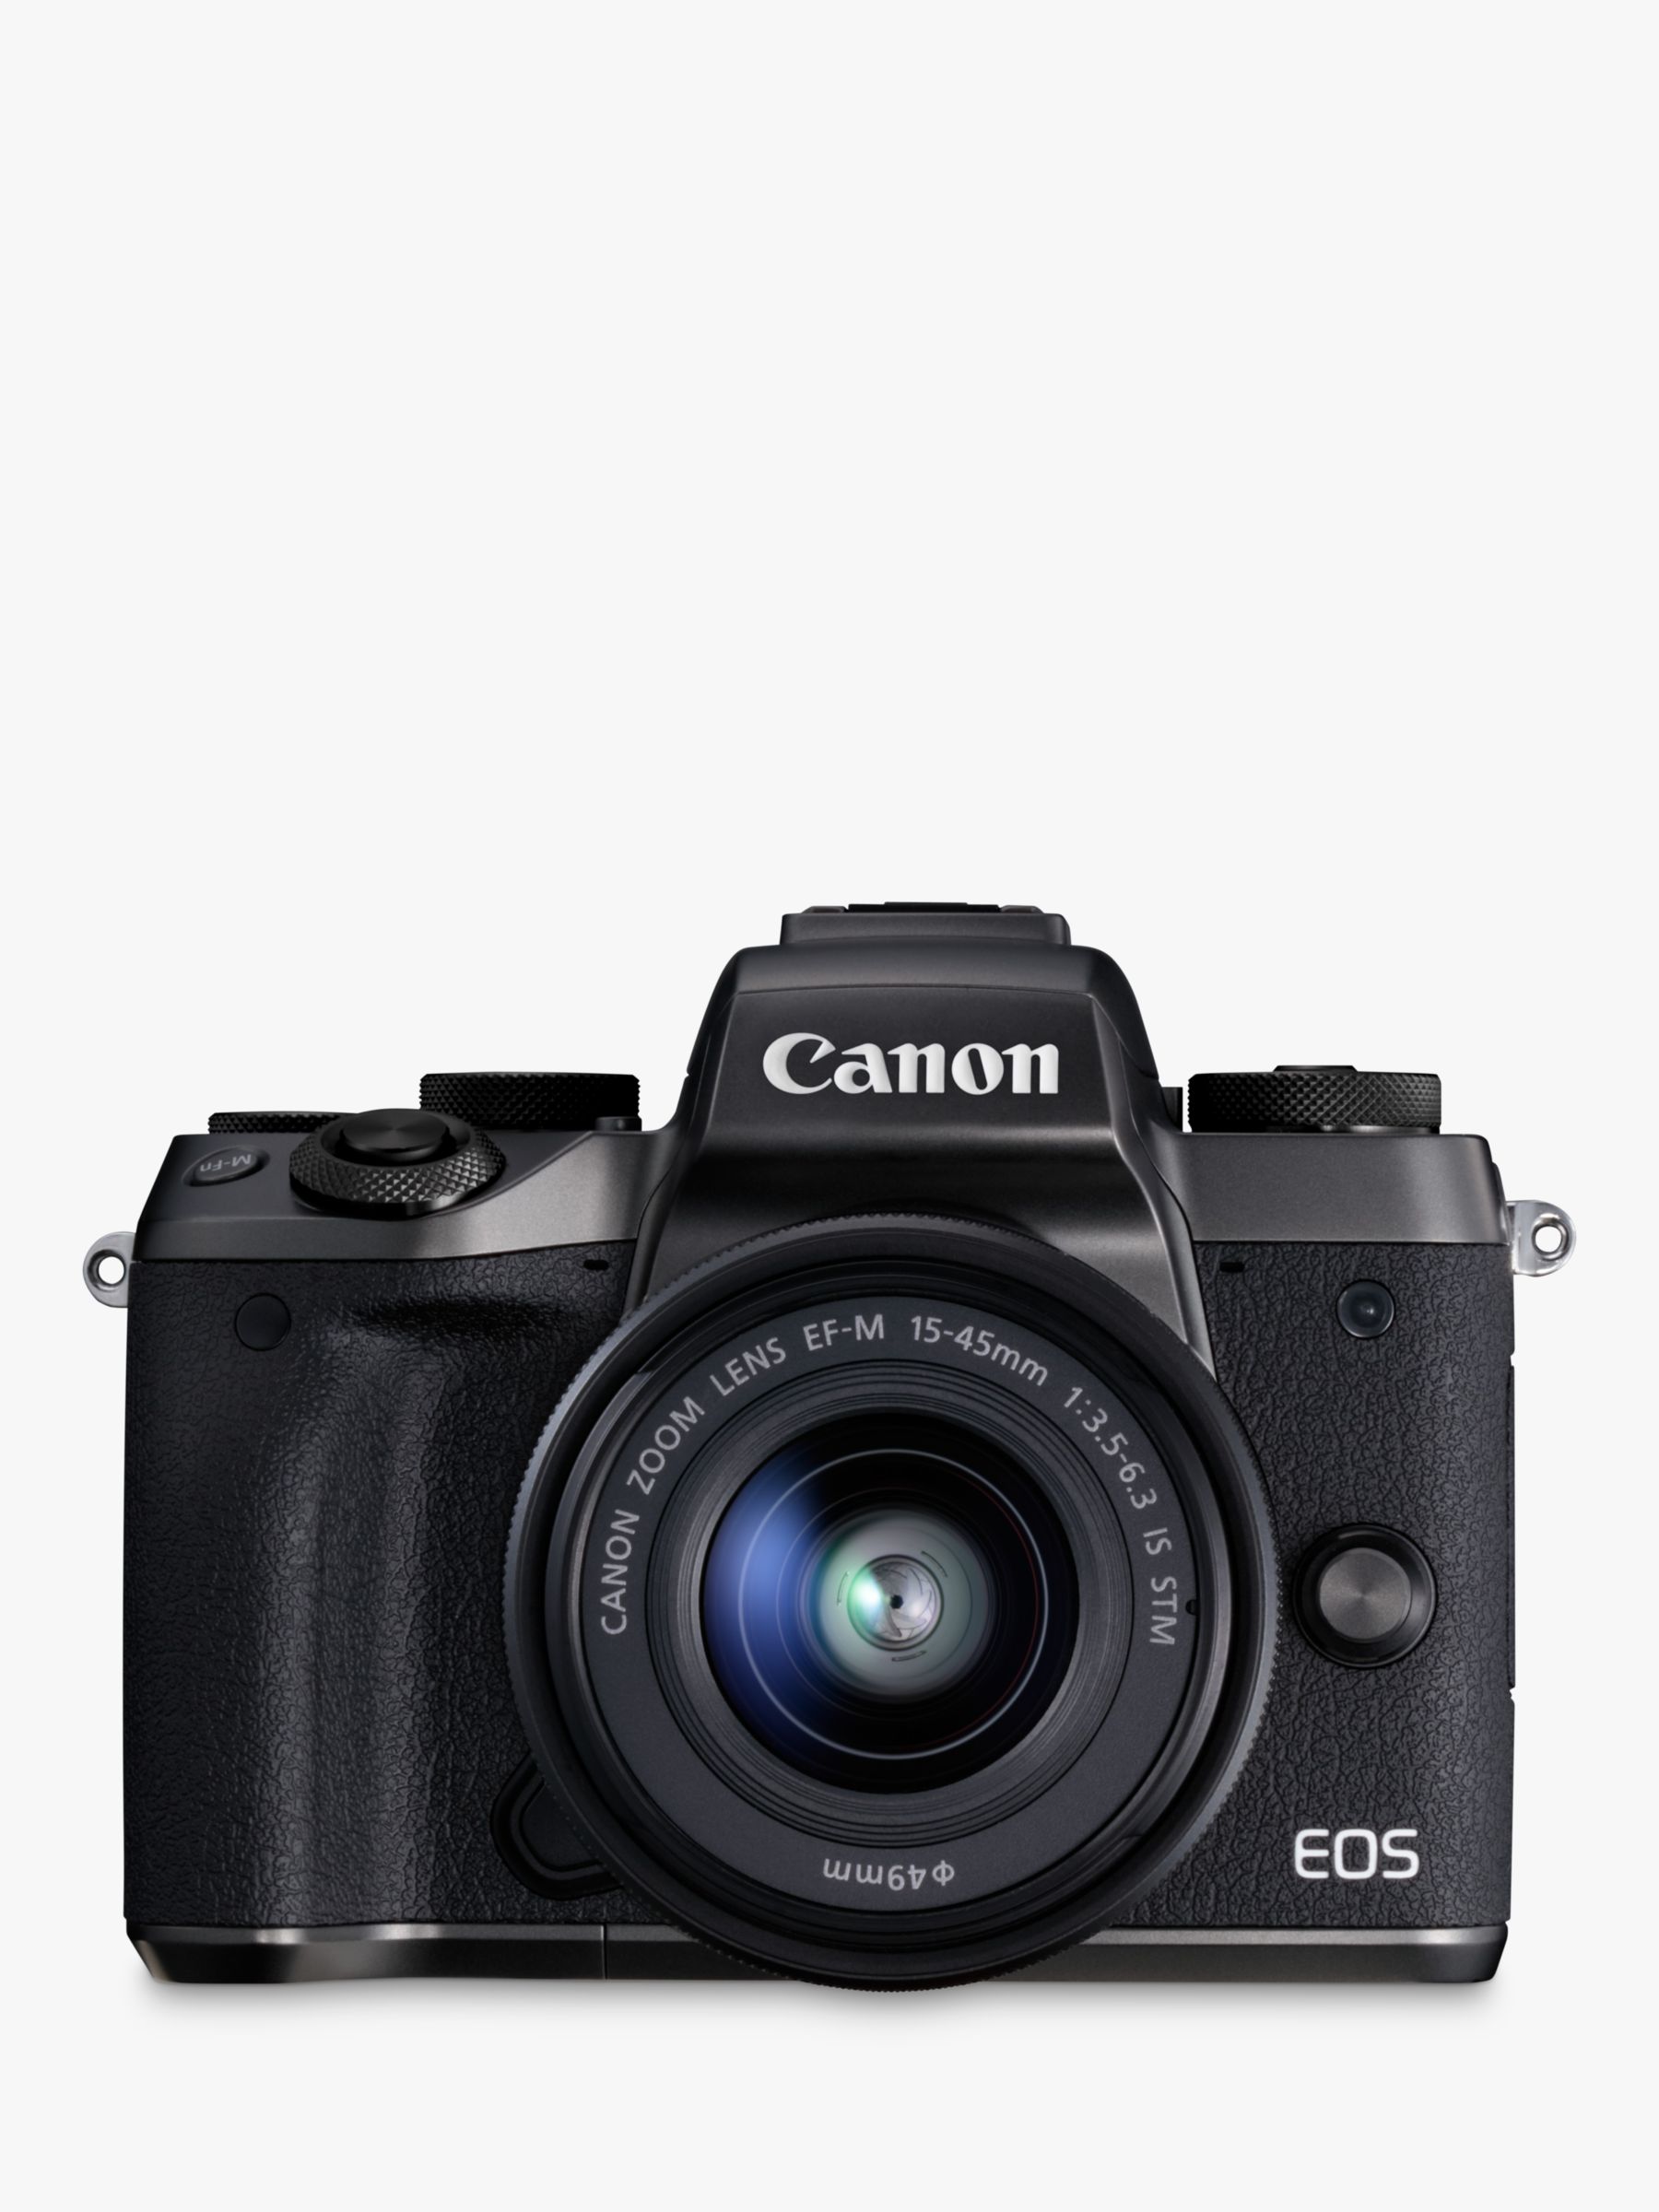 Canon EOS M5 Compact System Camera with EF-M 15-45mm IS STM lens, HD 1080p, 24.2MP, Wi-Fi, Bluetooth, NFC, 3.2 LCD Tiltable Touch Screen with Lens Mount Adapter